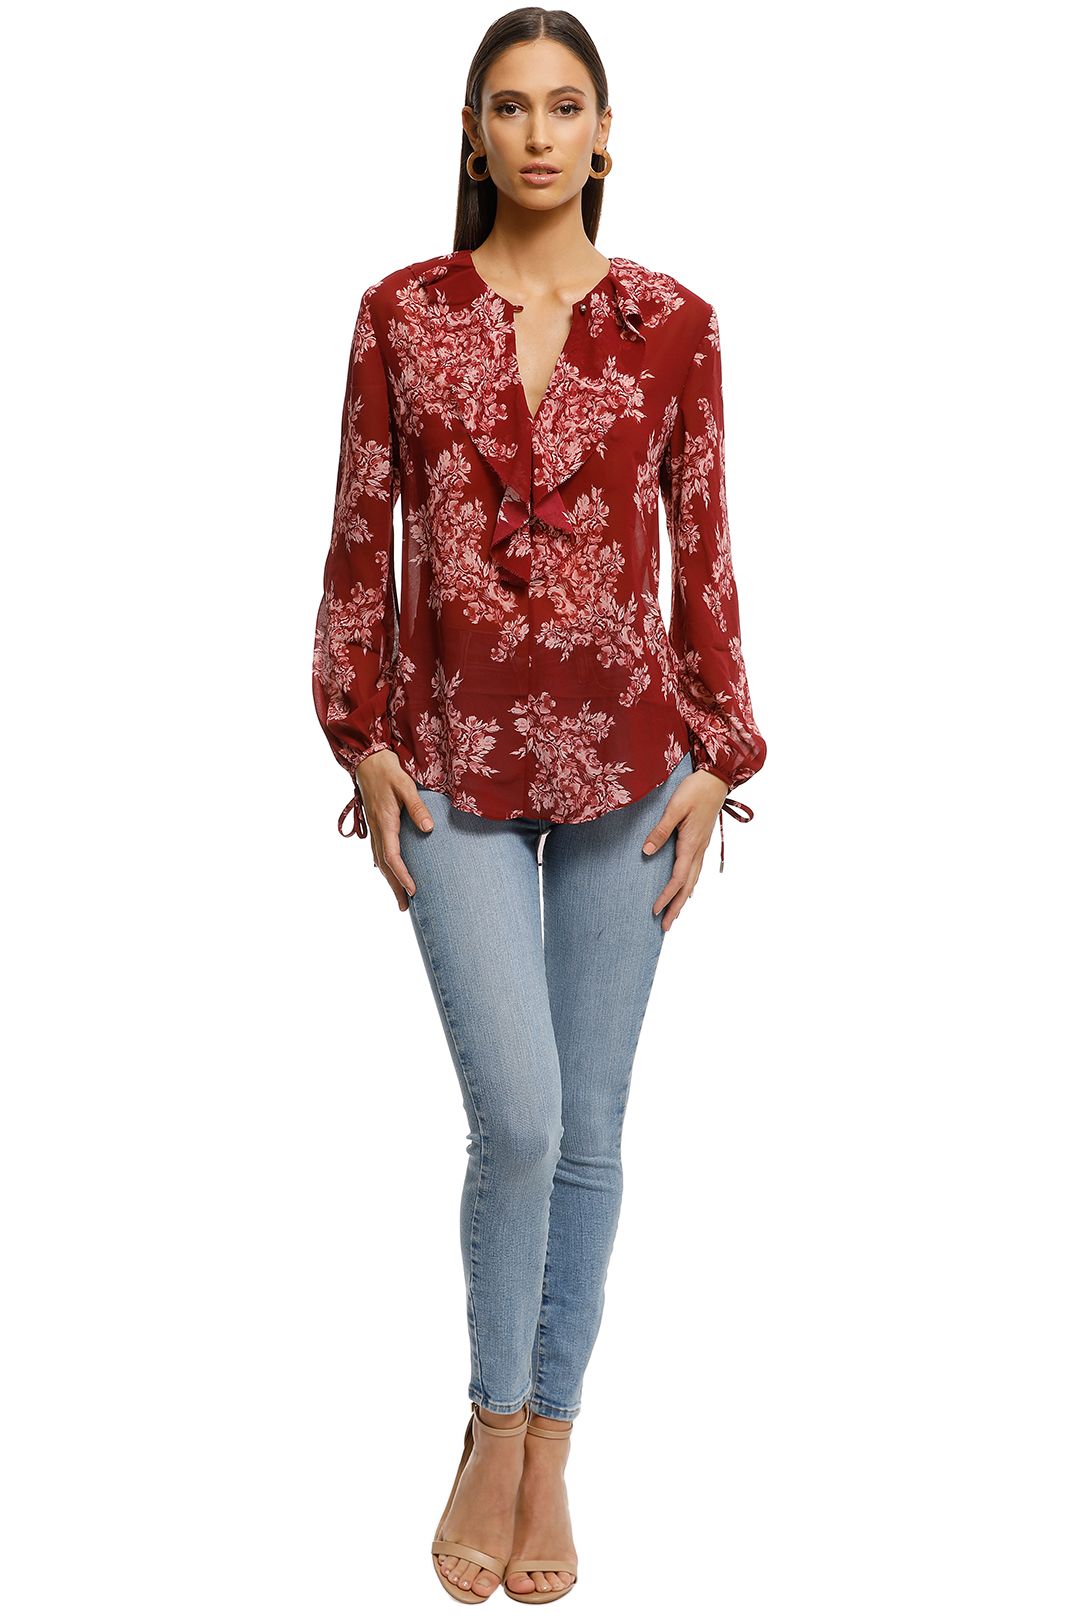 Lover-Mayflower-Blouse-Red-Floral-Front